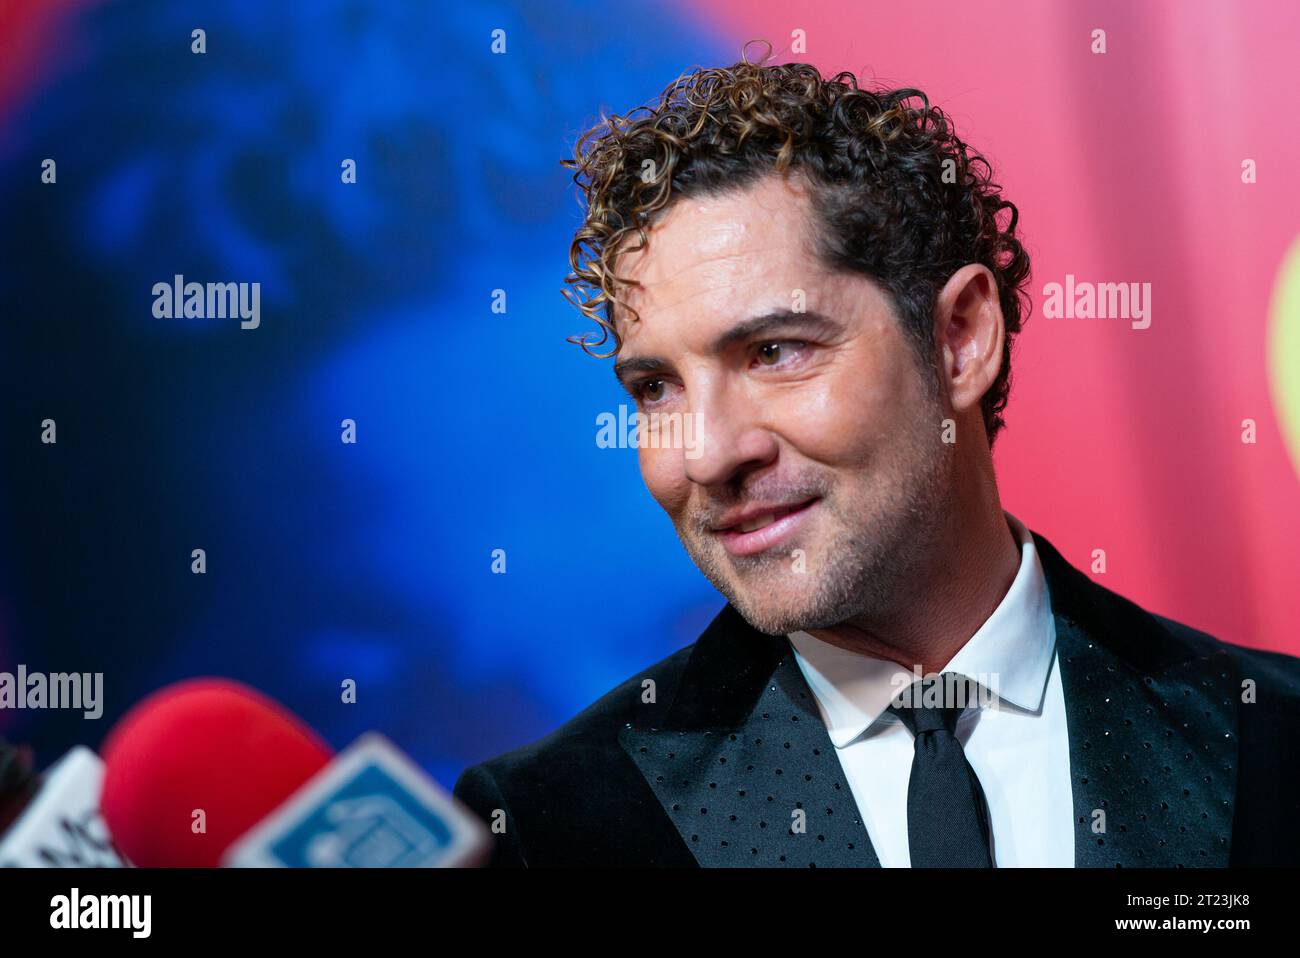 Rosanna Zanetti  and David Bisbal attends the 'Bisbal' documentary premiere at Circulo de las Bellas Artes on October 16, 2023 in Madrid, Spain Stock Photo